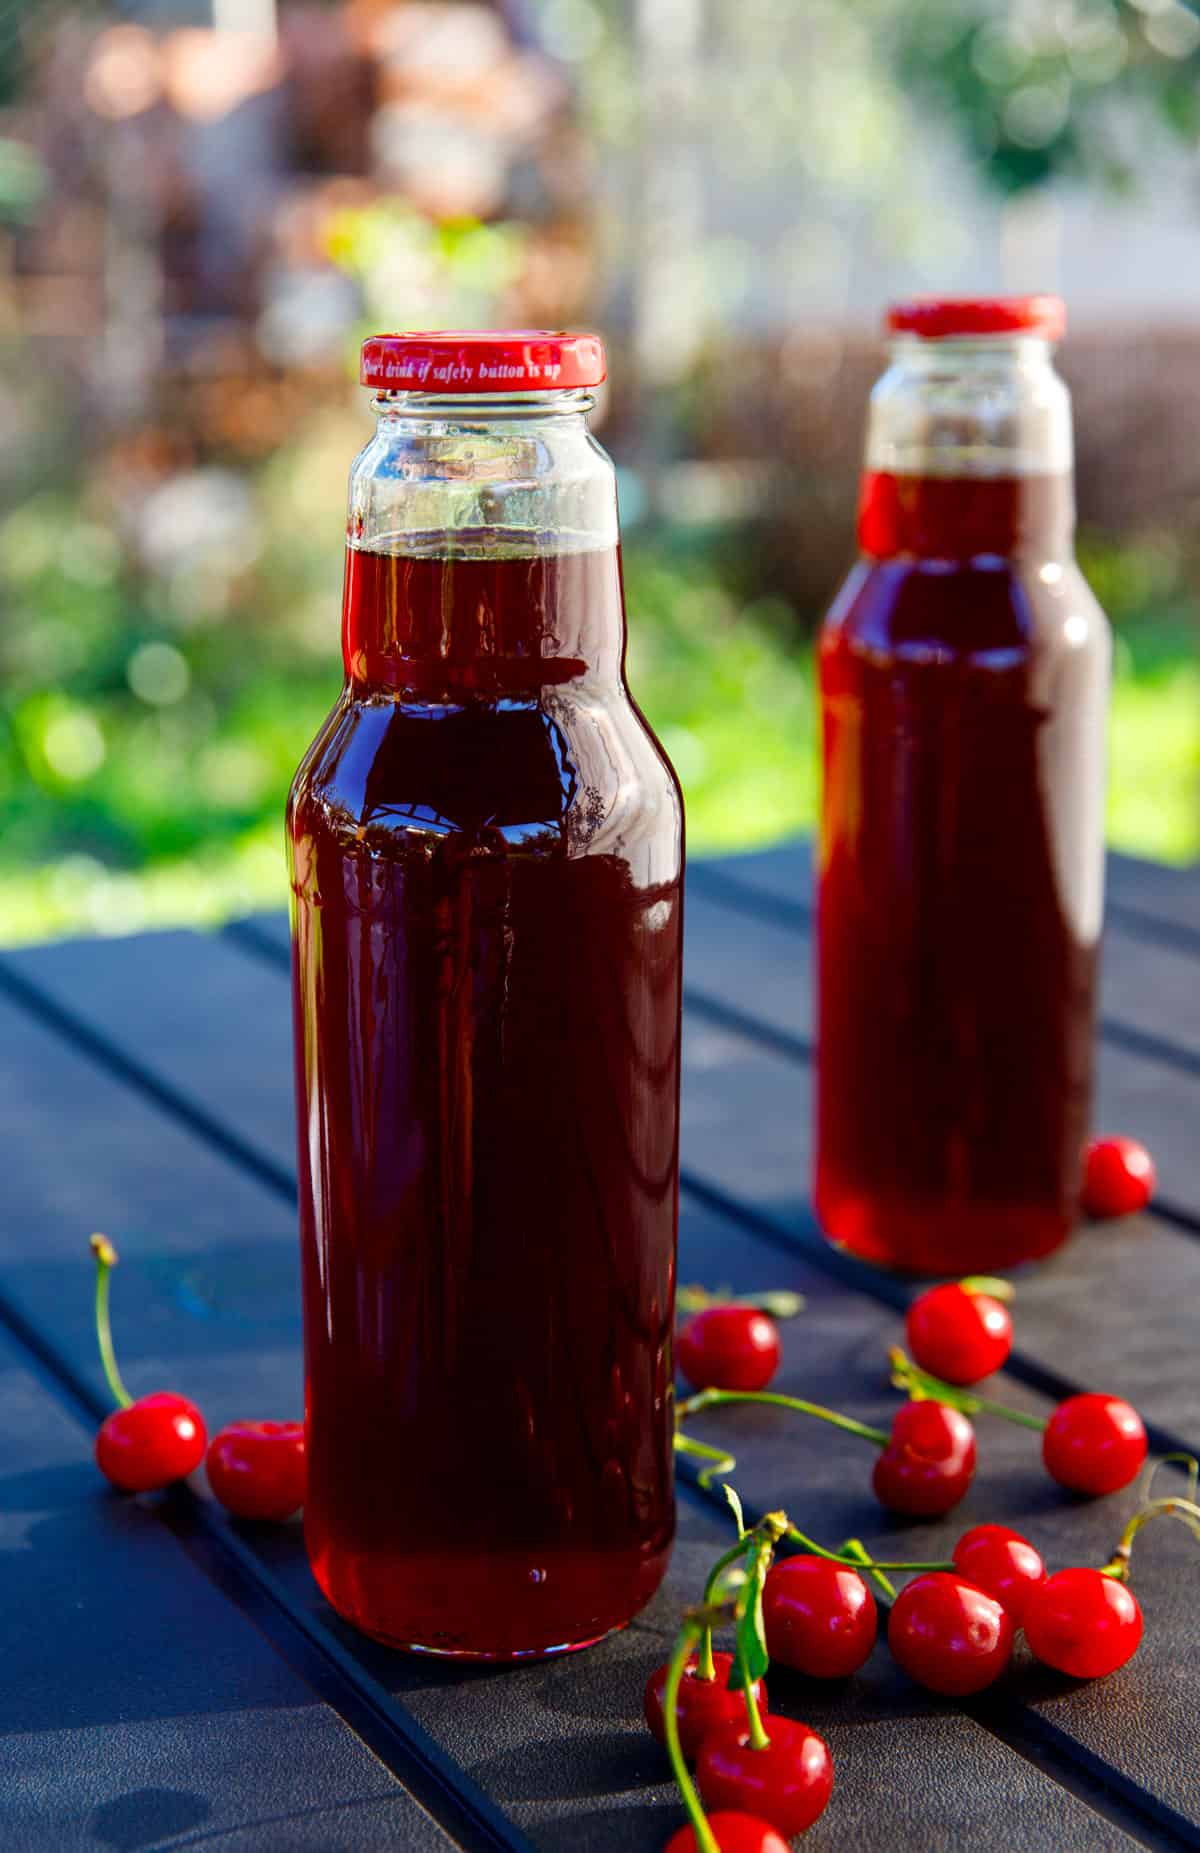 Tart Cherry Concentrate Juice - Cooking LSL